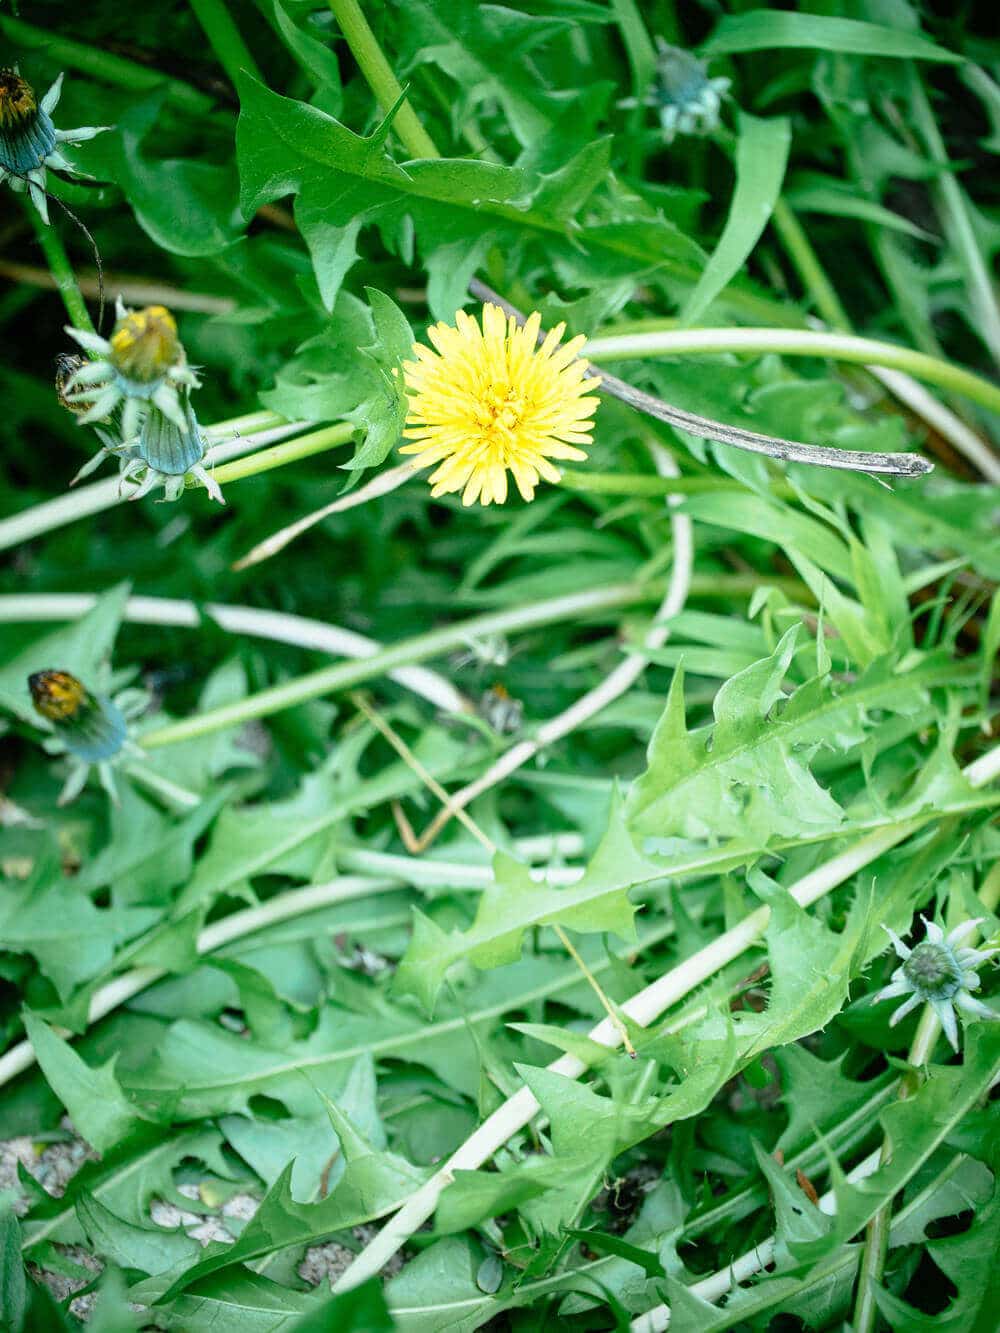 Defending the dandelion: it's not just another weed